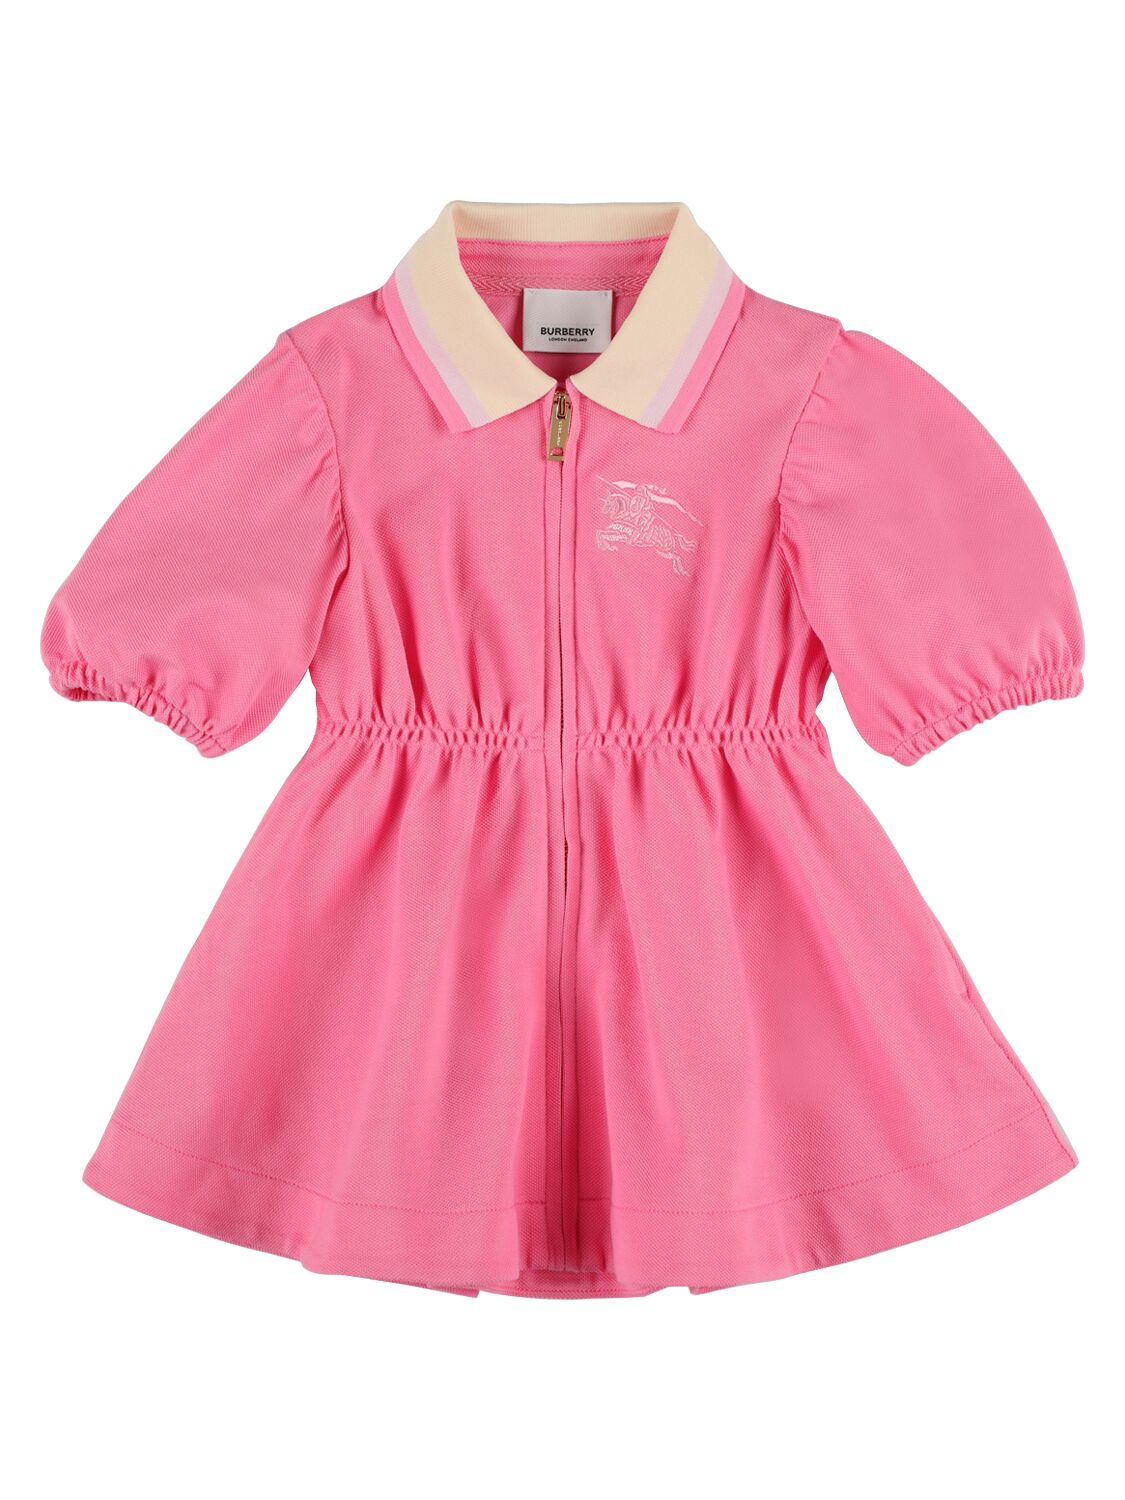 Burberry Kids' Embroidered Logo Cotton Dress In Pink